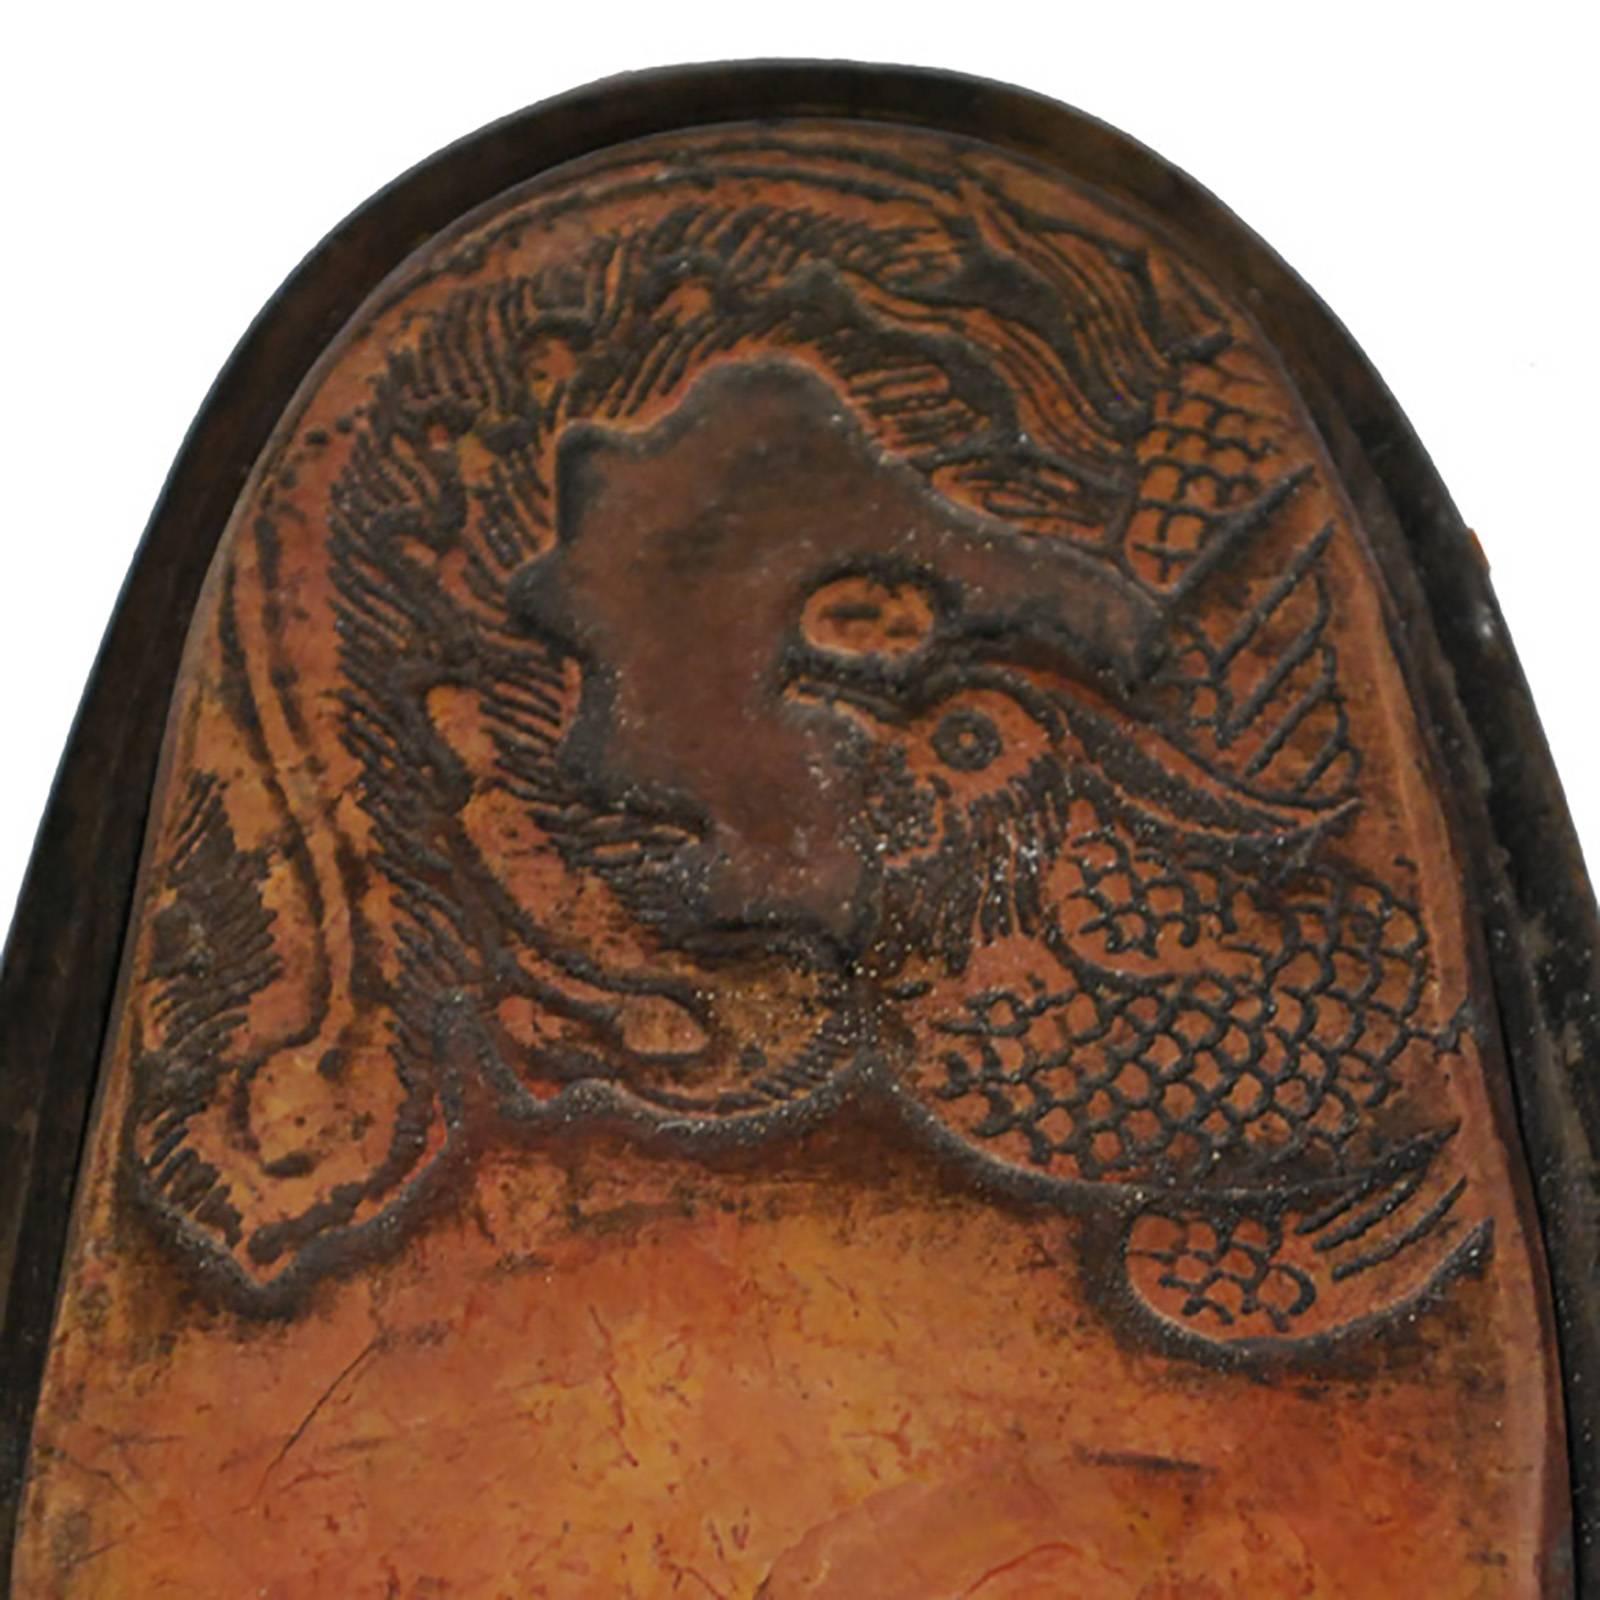 Functionally used as a surface to mix dry ink and water for calligraphy, this inkstone was also an object revered for its symbolism. The phoenix, known as “the king of birds” in Chinese mythology, only appears in times of peace and prosperity and